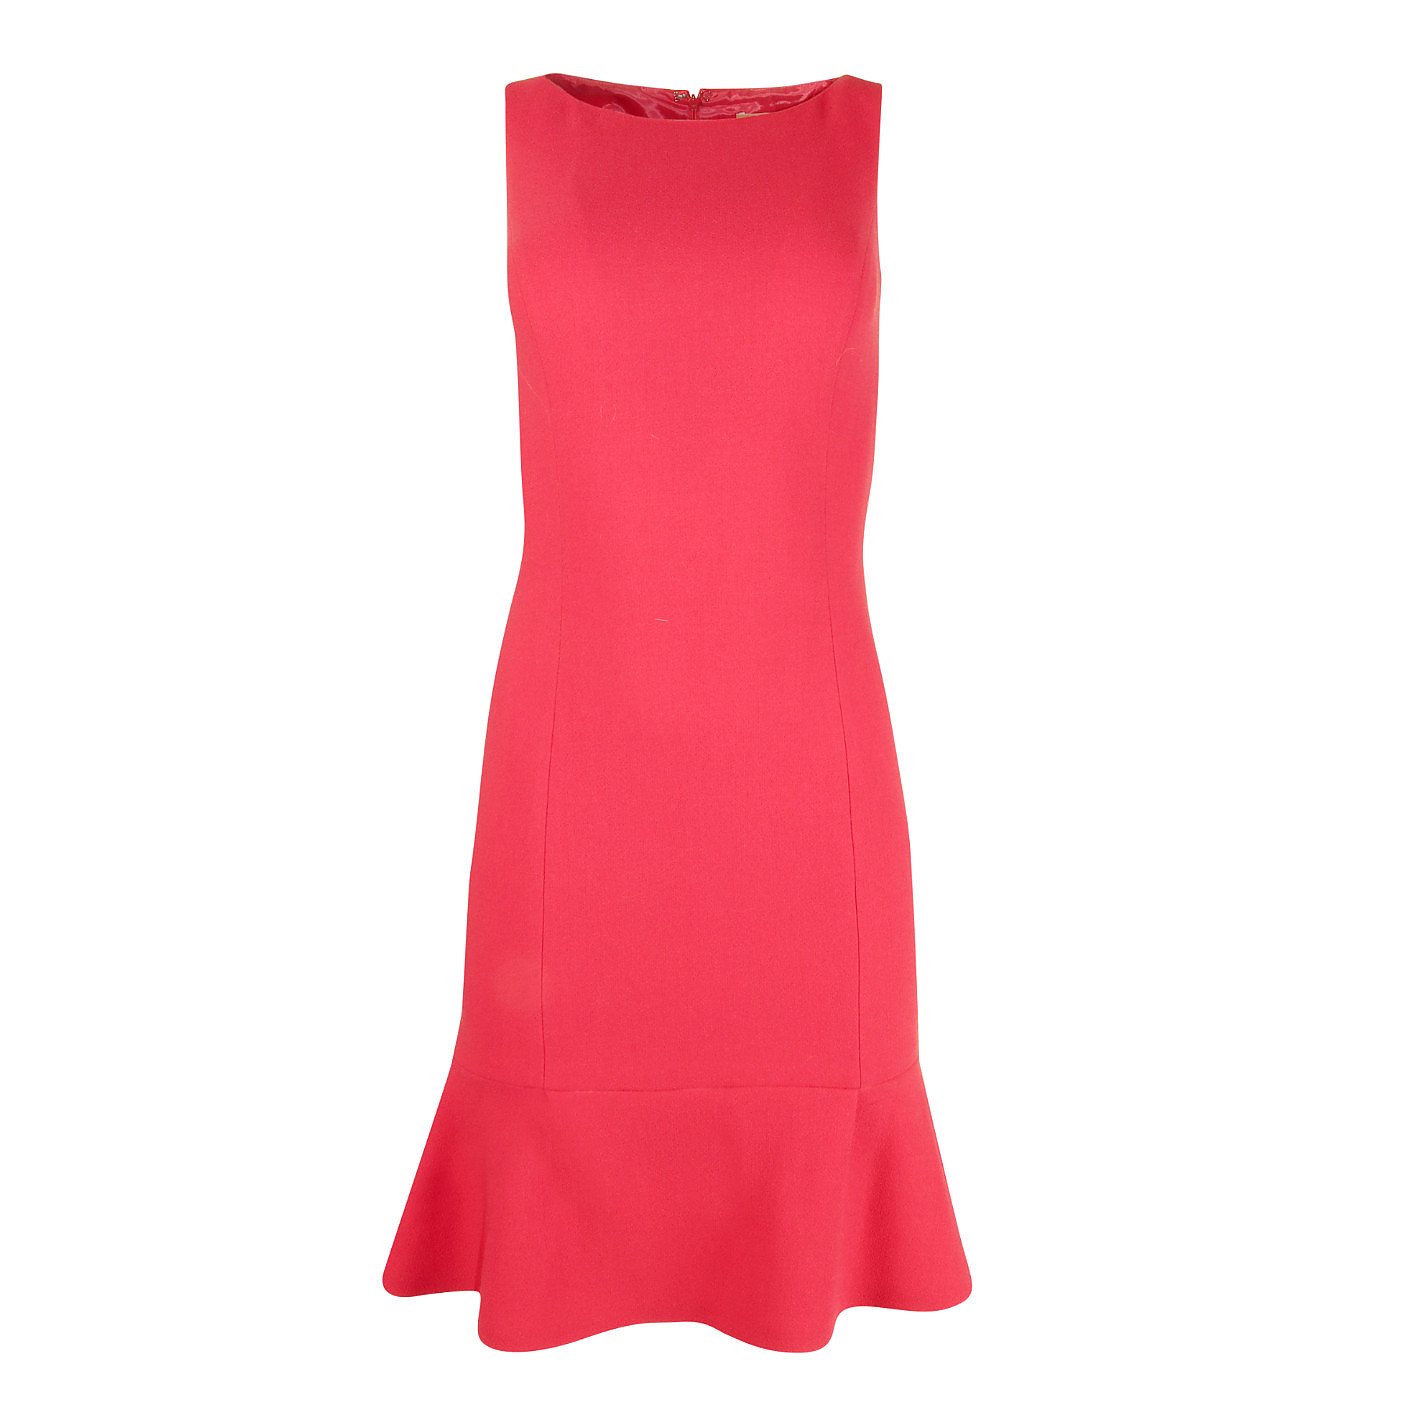 Michael Kors Sleeveless Fit And Flare Dress